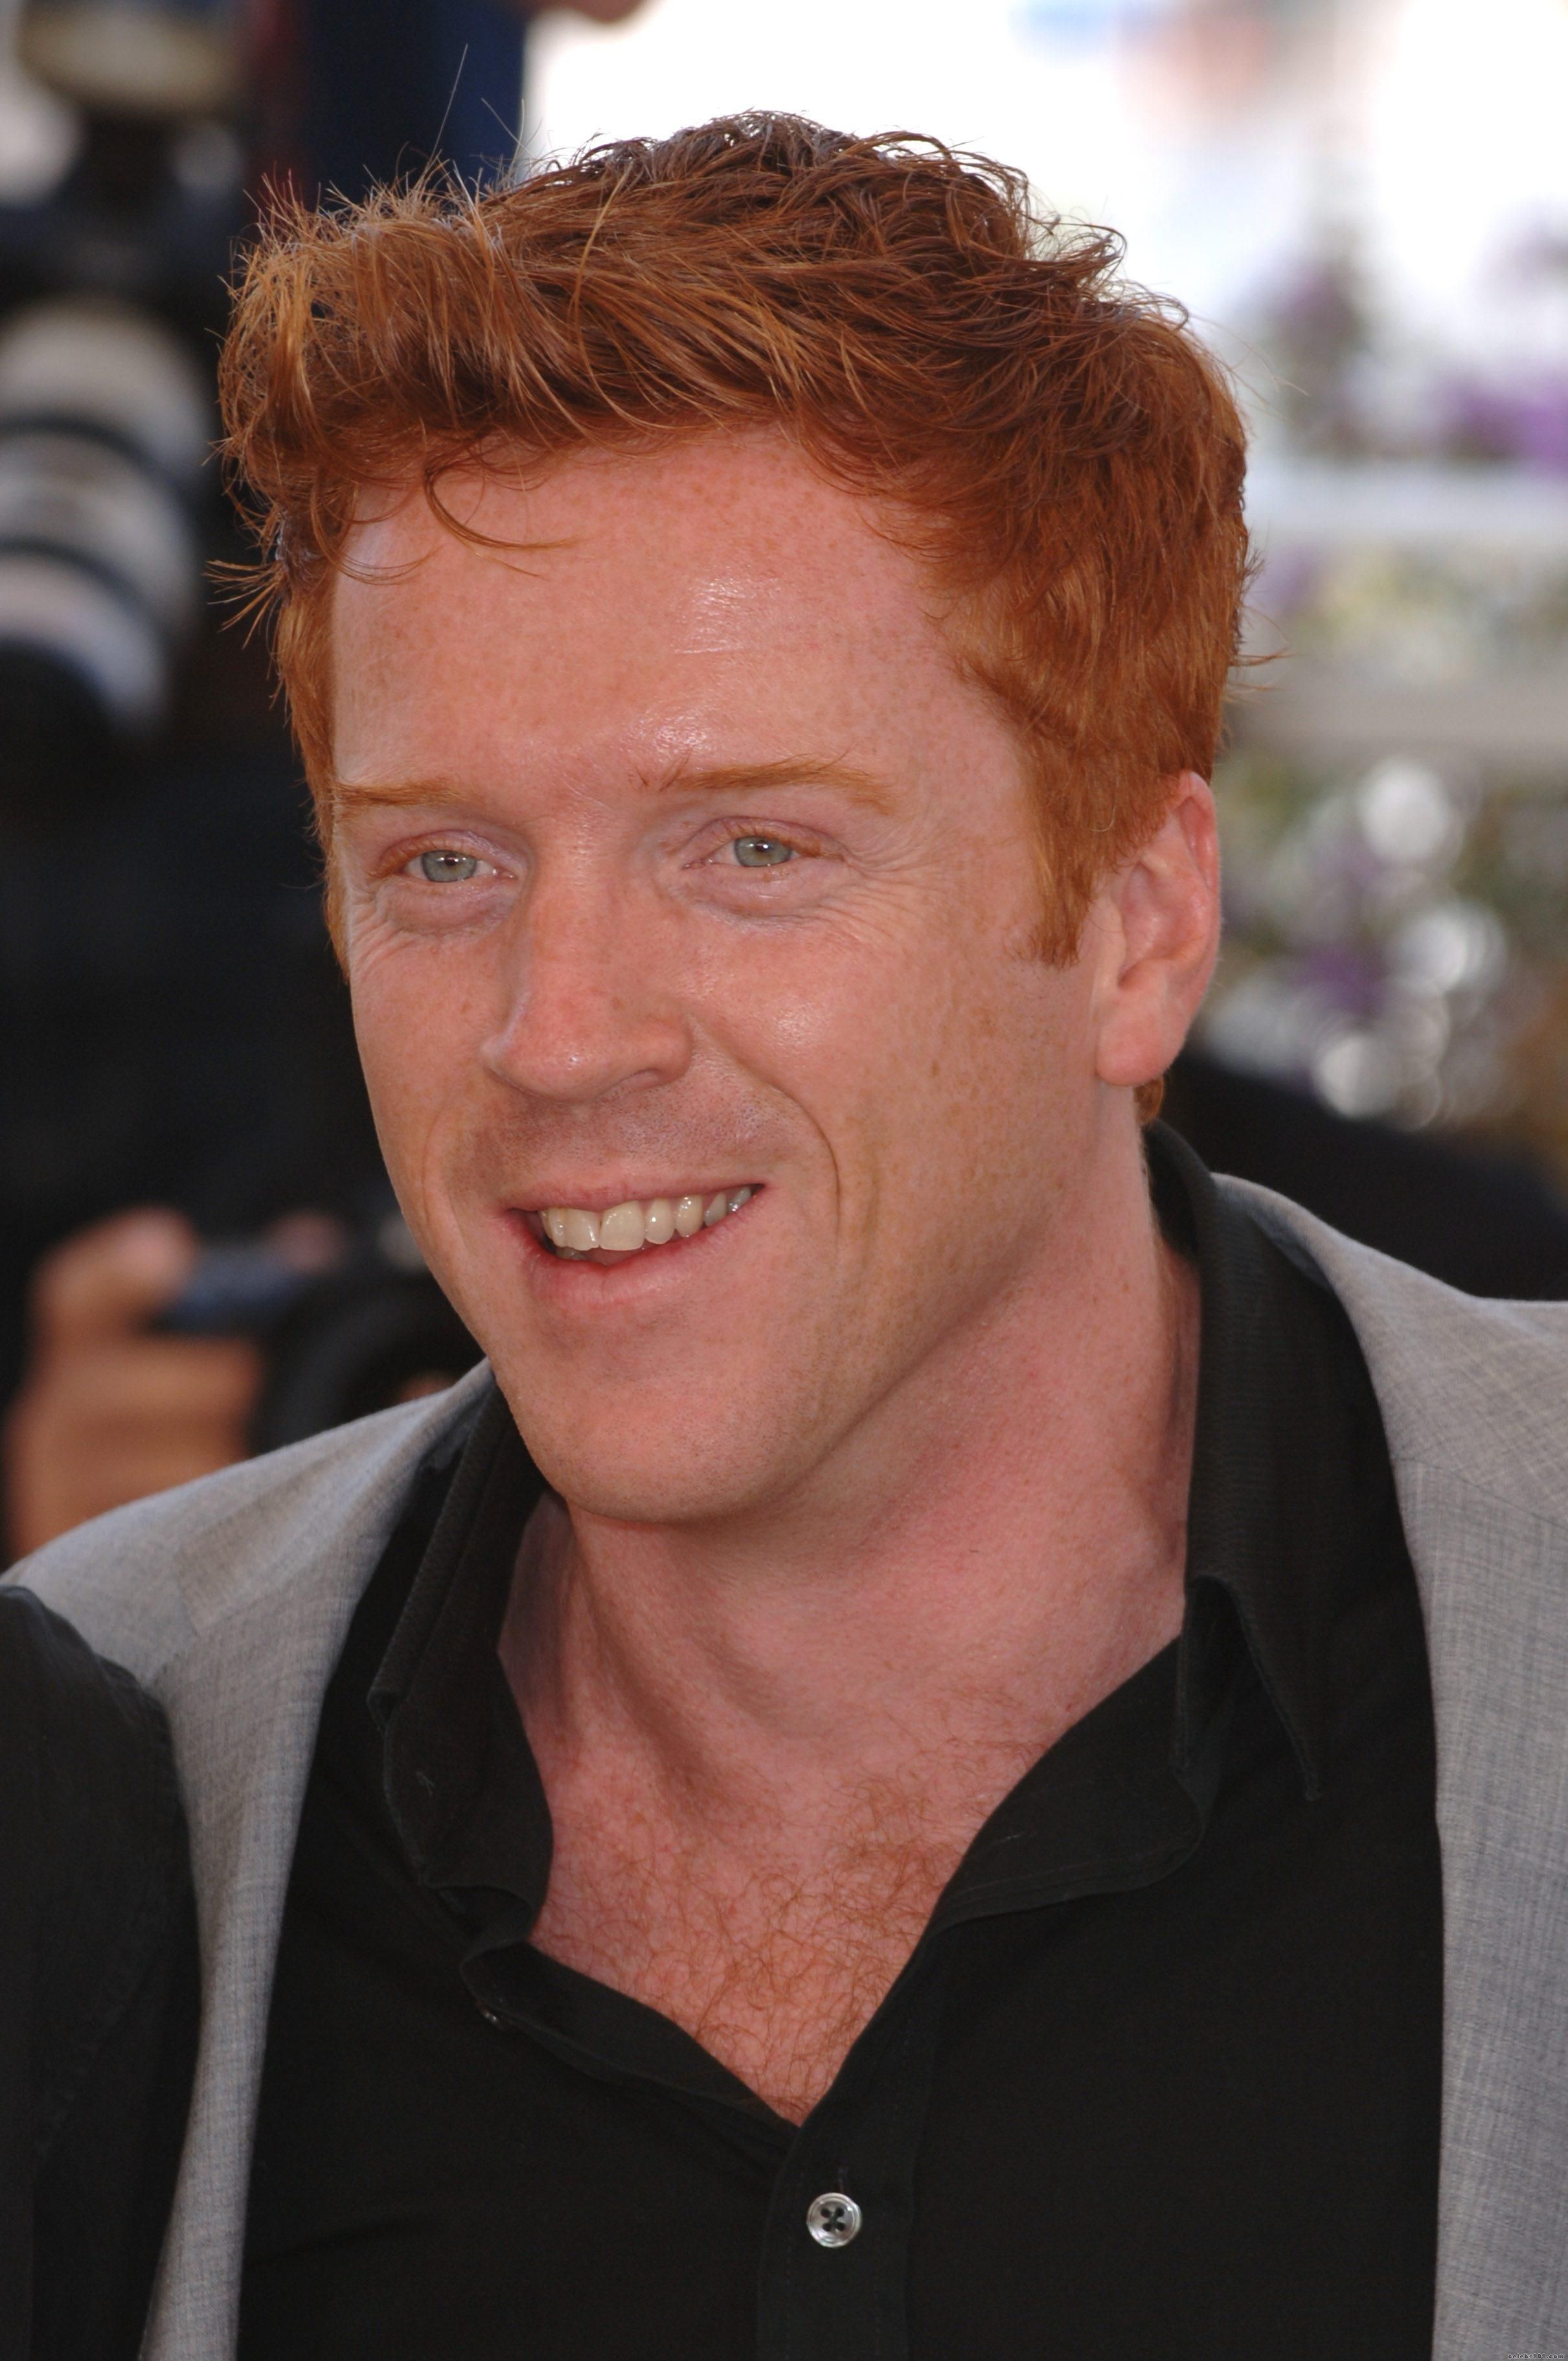 Damian Lewis. I love gingers! He's so pretty!. Damian lewis, Actor photo, Ginger men